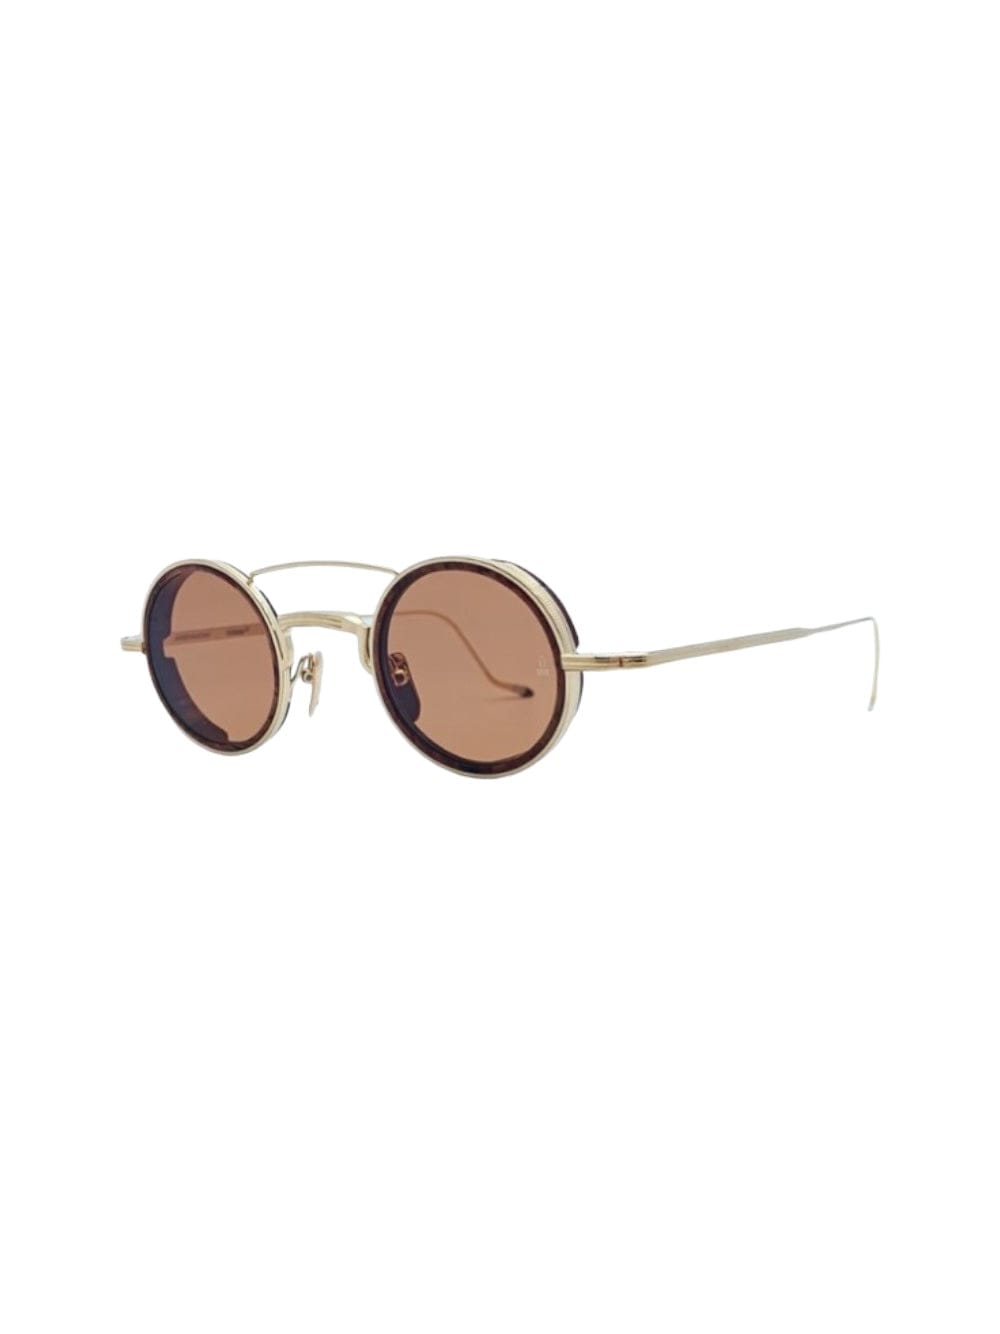 Jacques Marie Mage Ringo Sunglasses In Gold